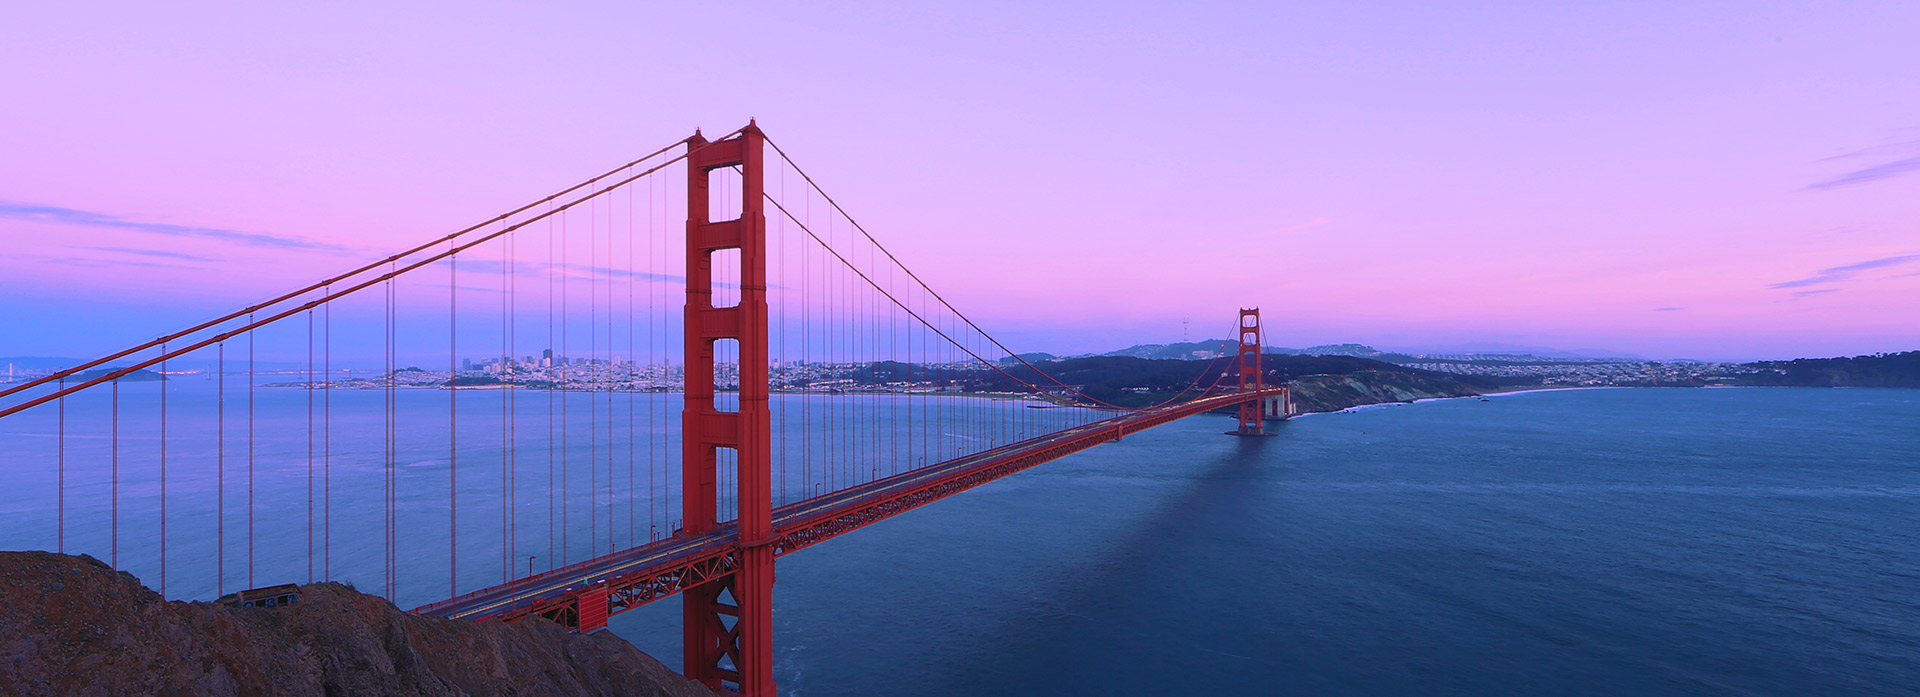 Golden Gate Bridge with a pink and purple sunset sky